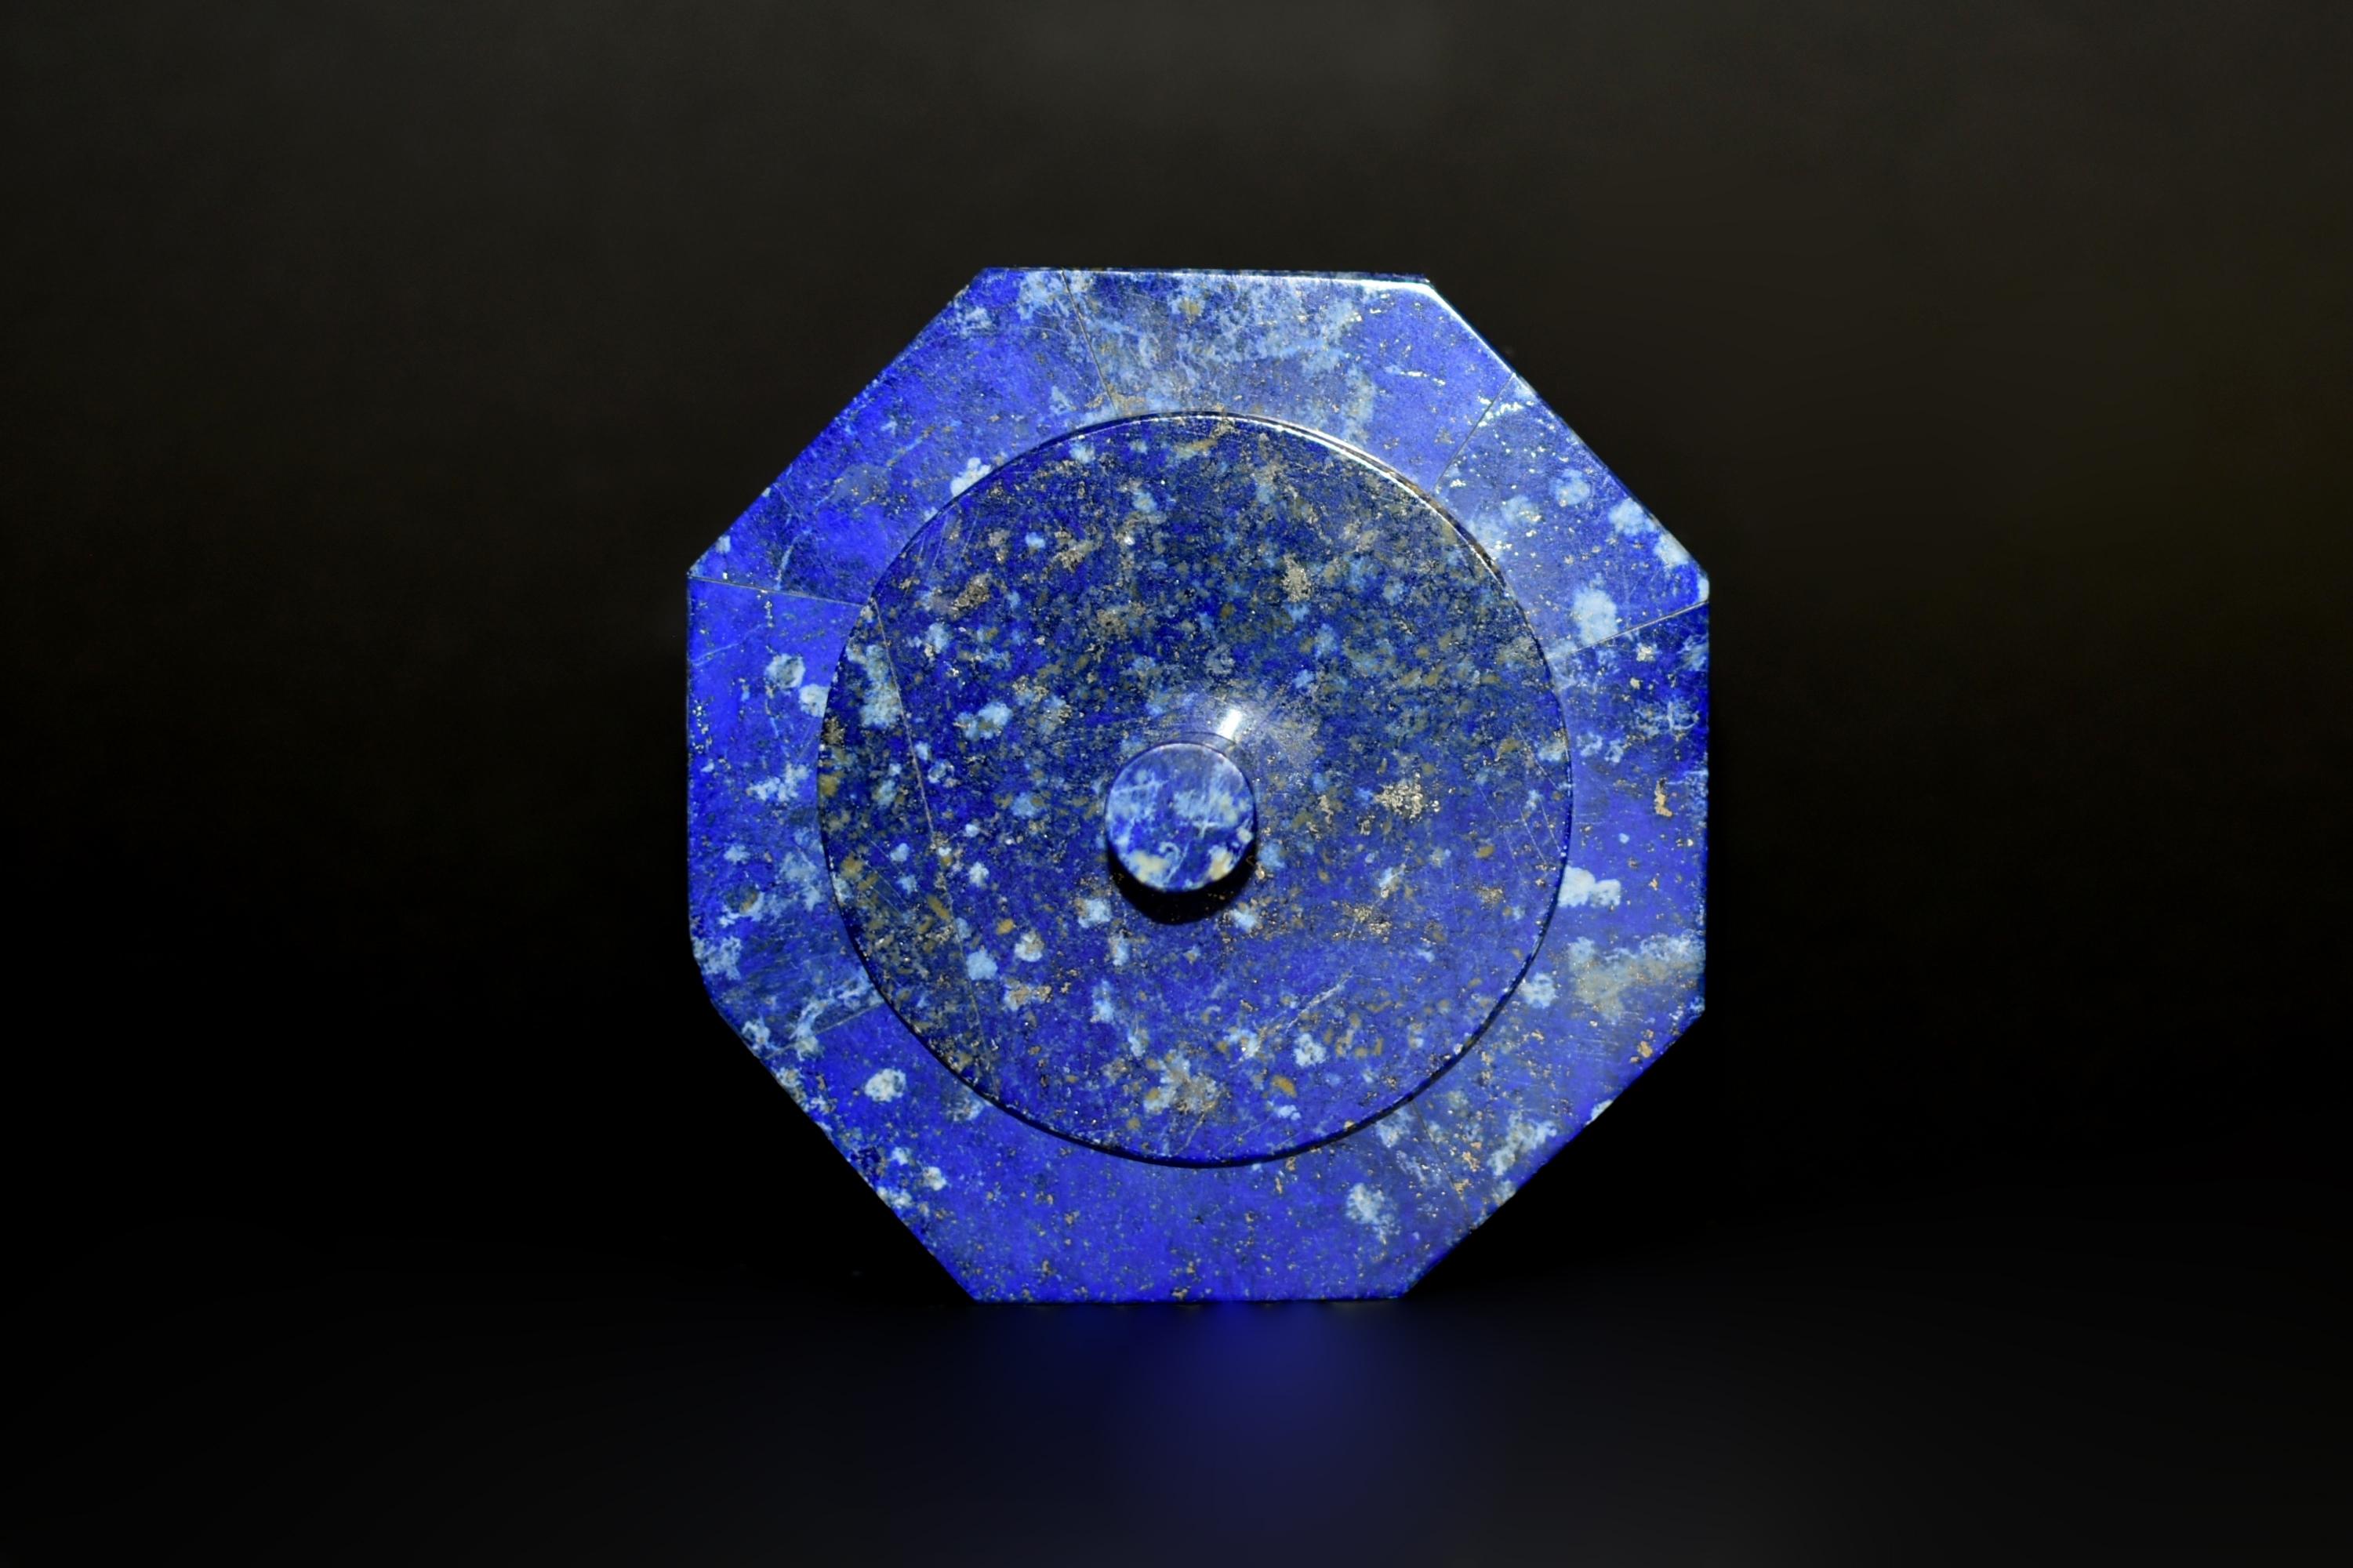 Beautiful 1.1 lb octagonal box made of the finest, grade AAA natural lapis lazuli from Afghanistan. All 8 sides are single panel lapis. A round lid with elegant finial and fine carrara marble interior. High percentage of Lazurite mineral gives the